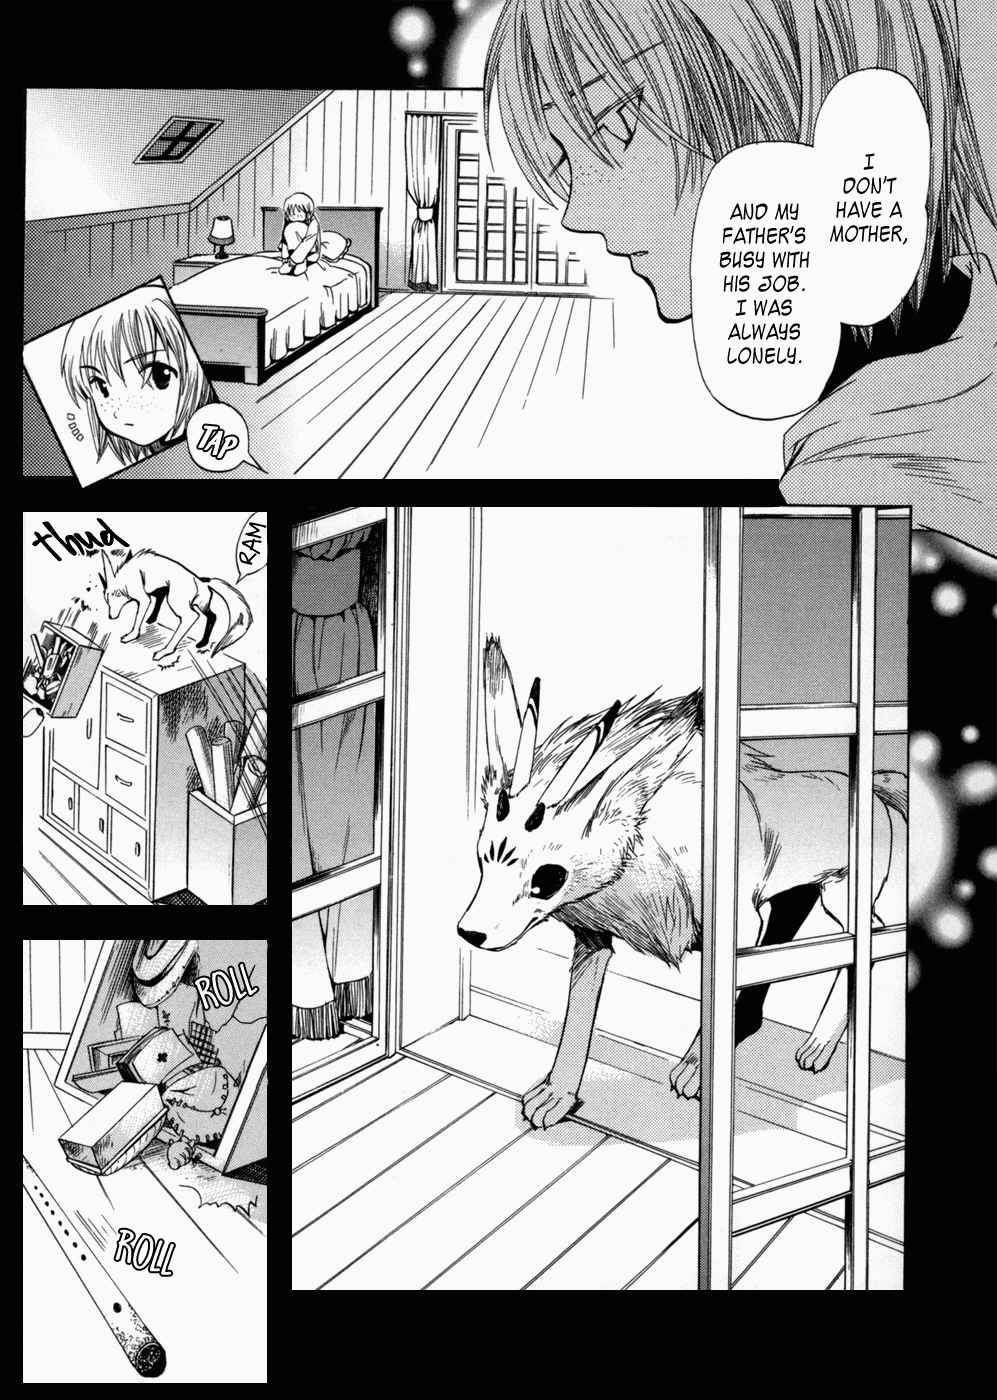 Lost Beasts of Another World Vol. 1 Ch. 2